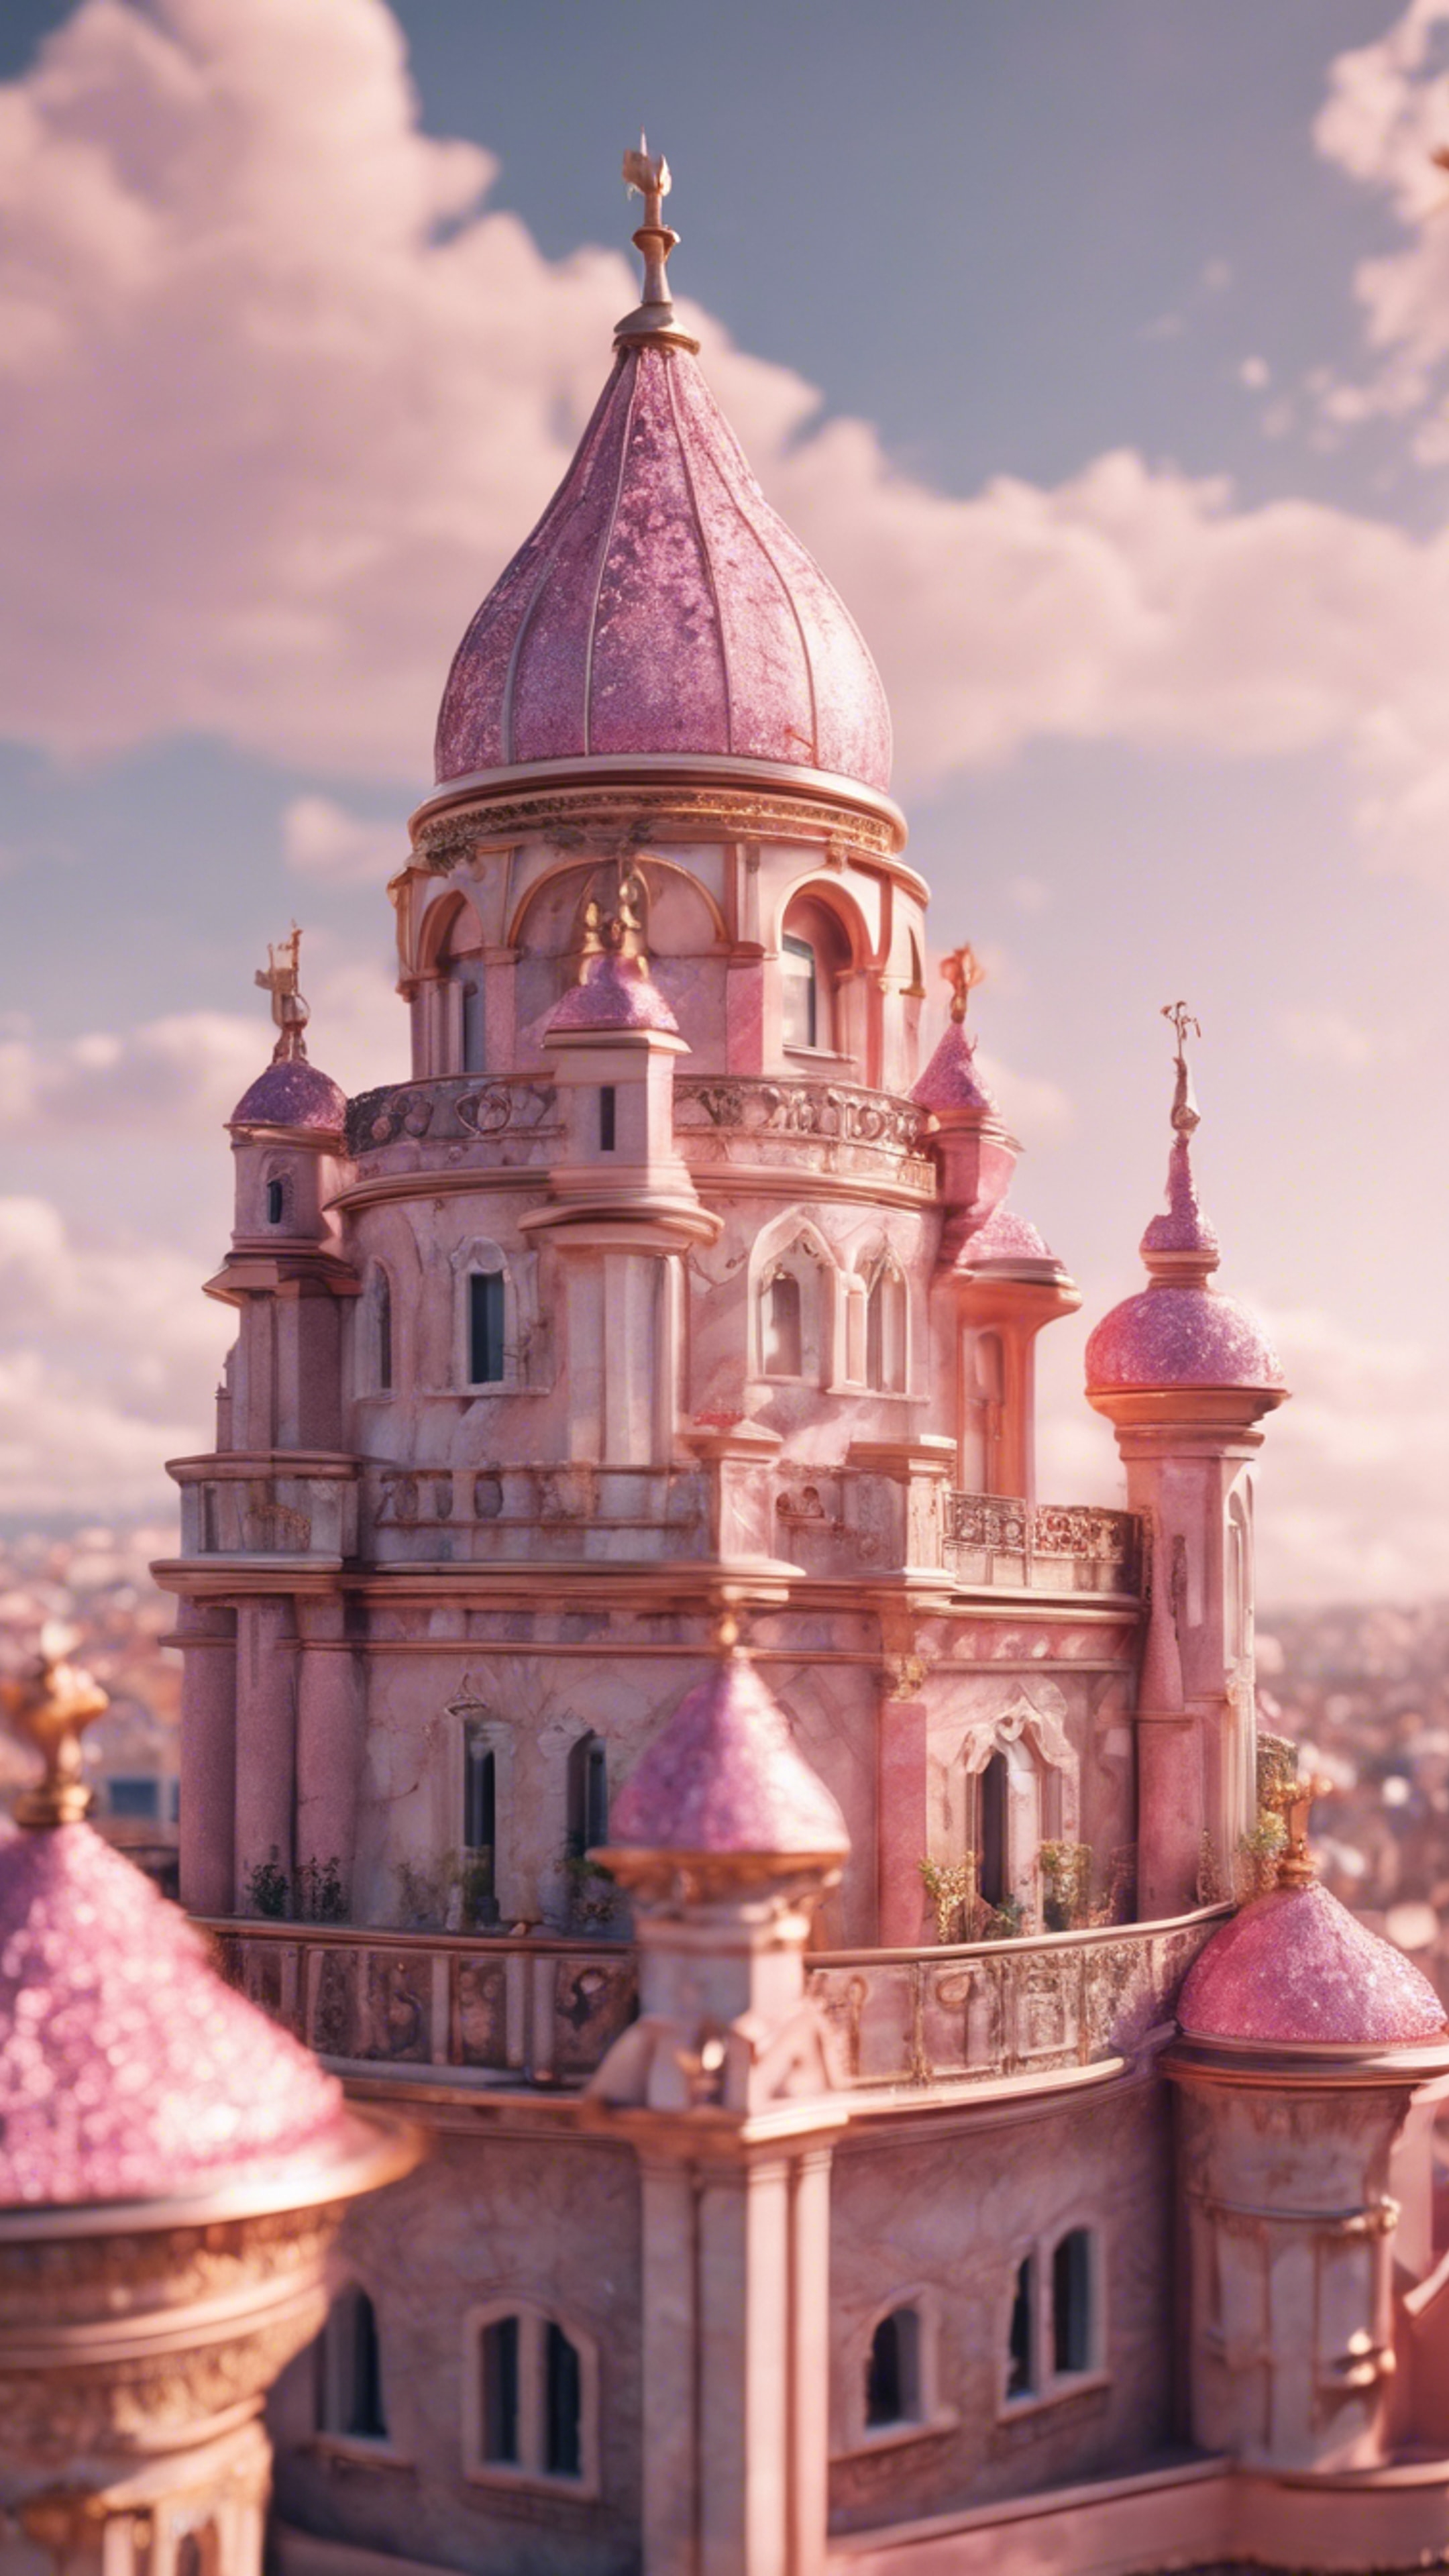 An ornate pink marble castle with glimmering golden rooftops during a sunny afternoon. Tapeet[39cdf807c12f4b9c8dd2]